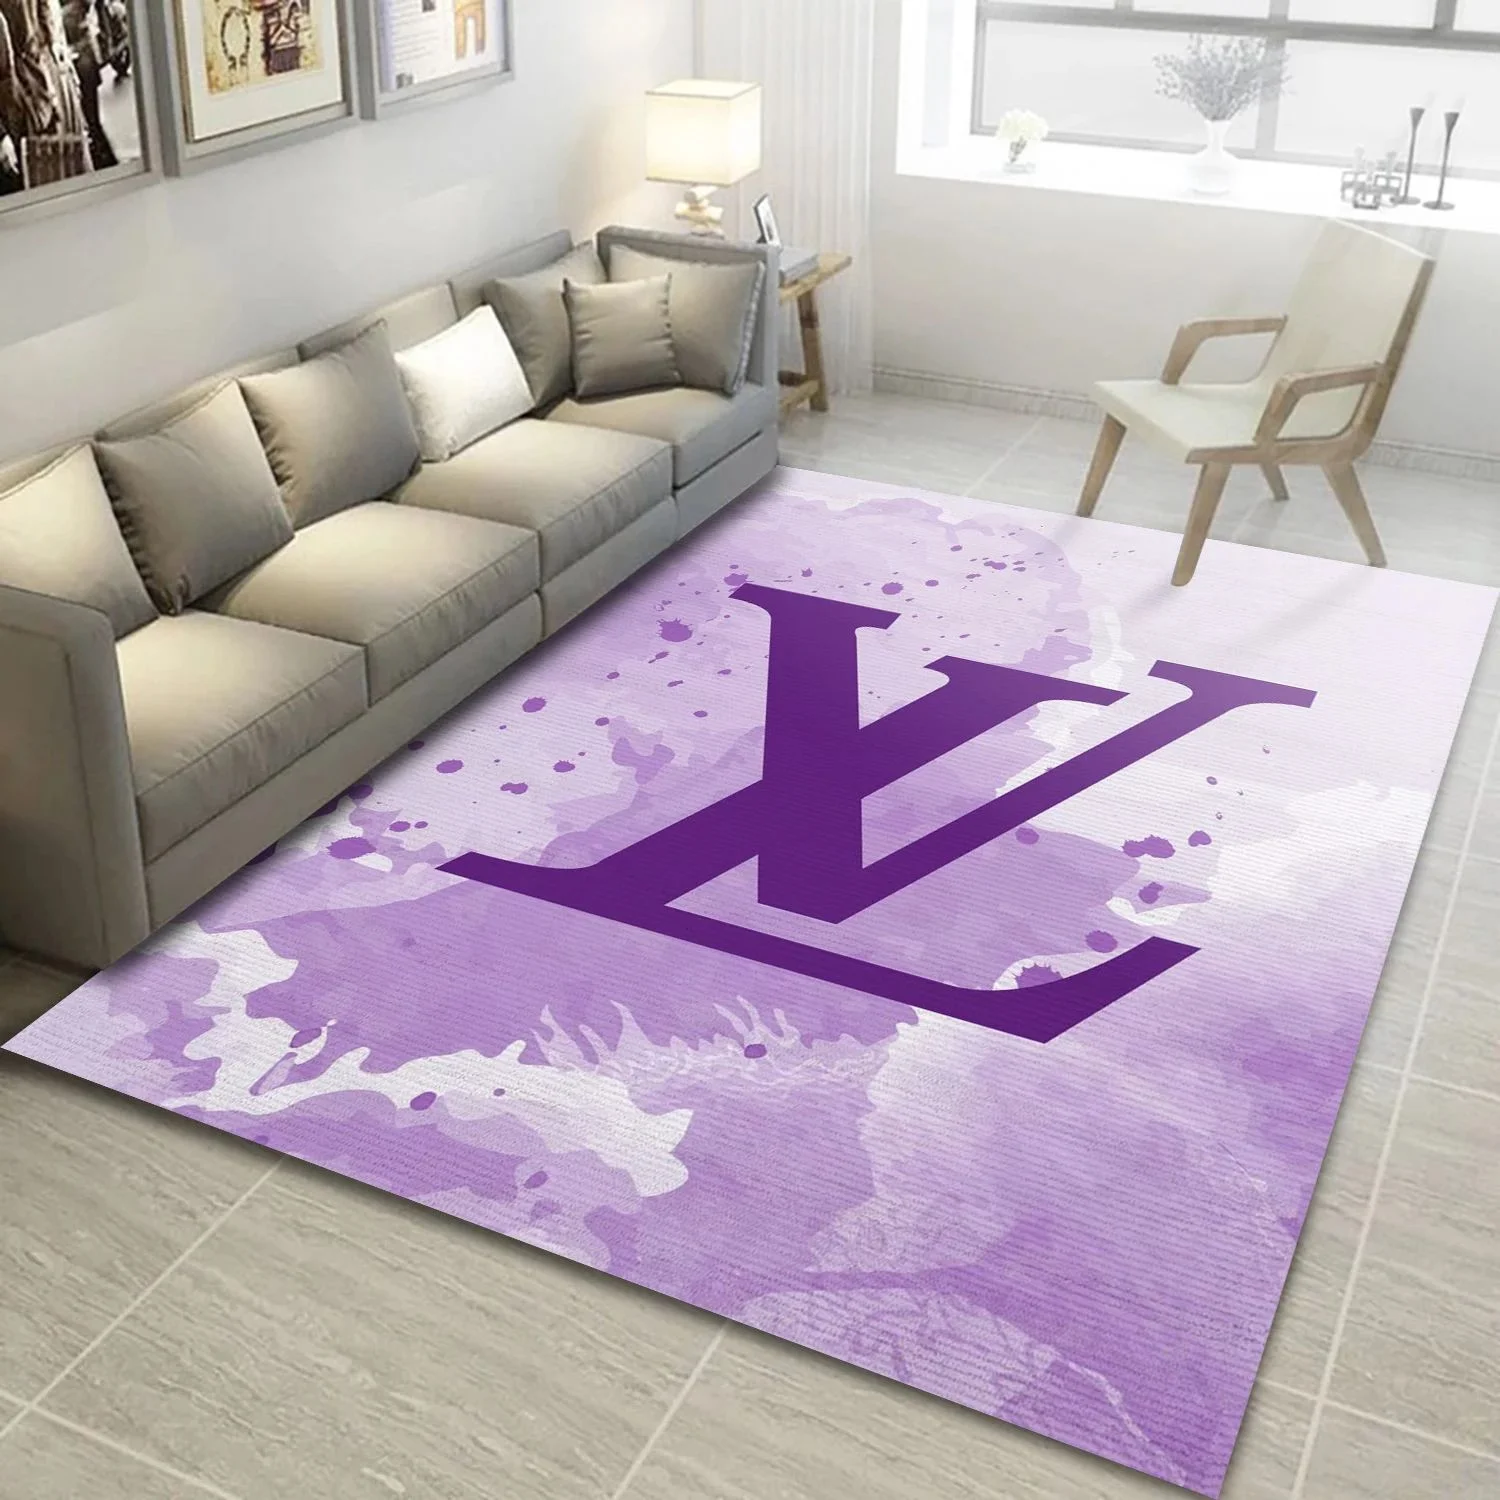 Louis Vuitton Rugs Hot 2023 Living Room Rugs Decor 12308–091727, by Cootie  Shop